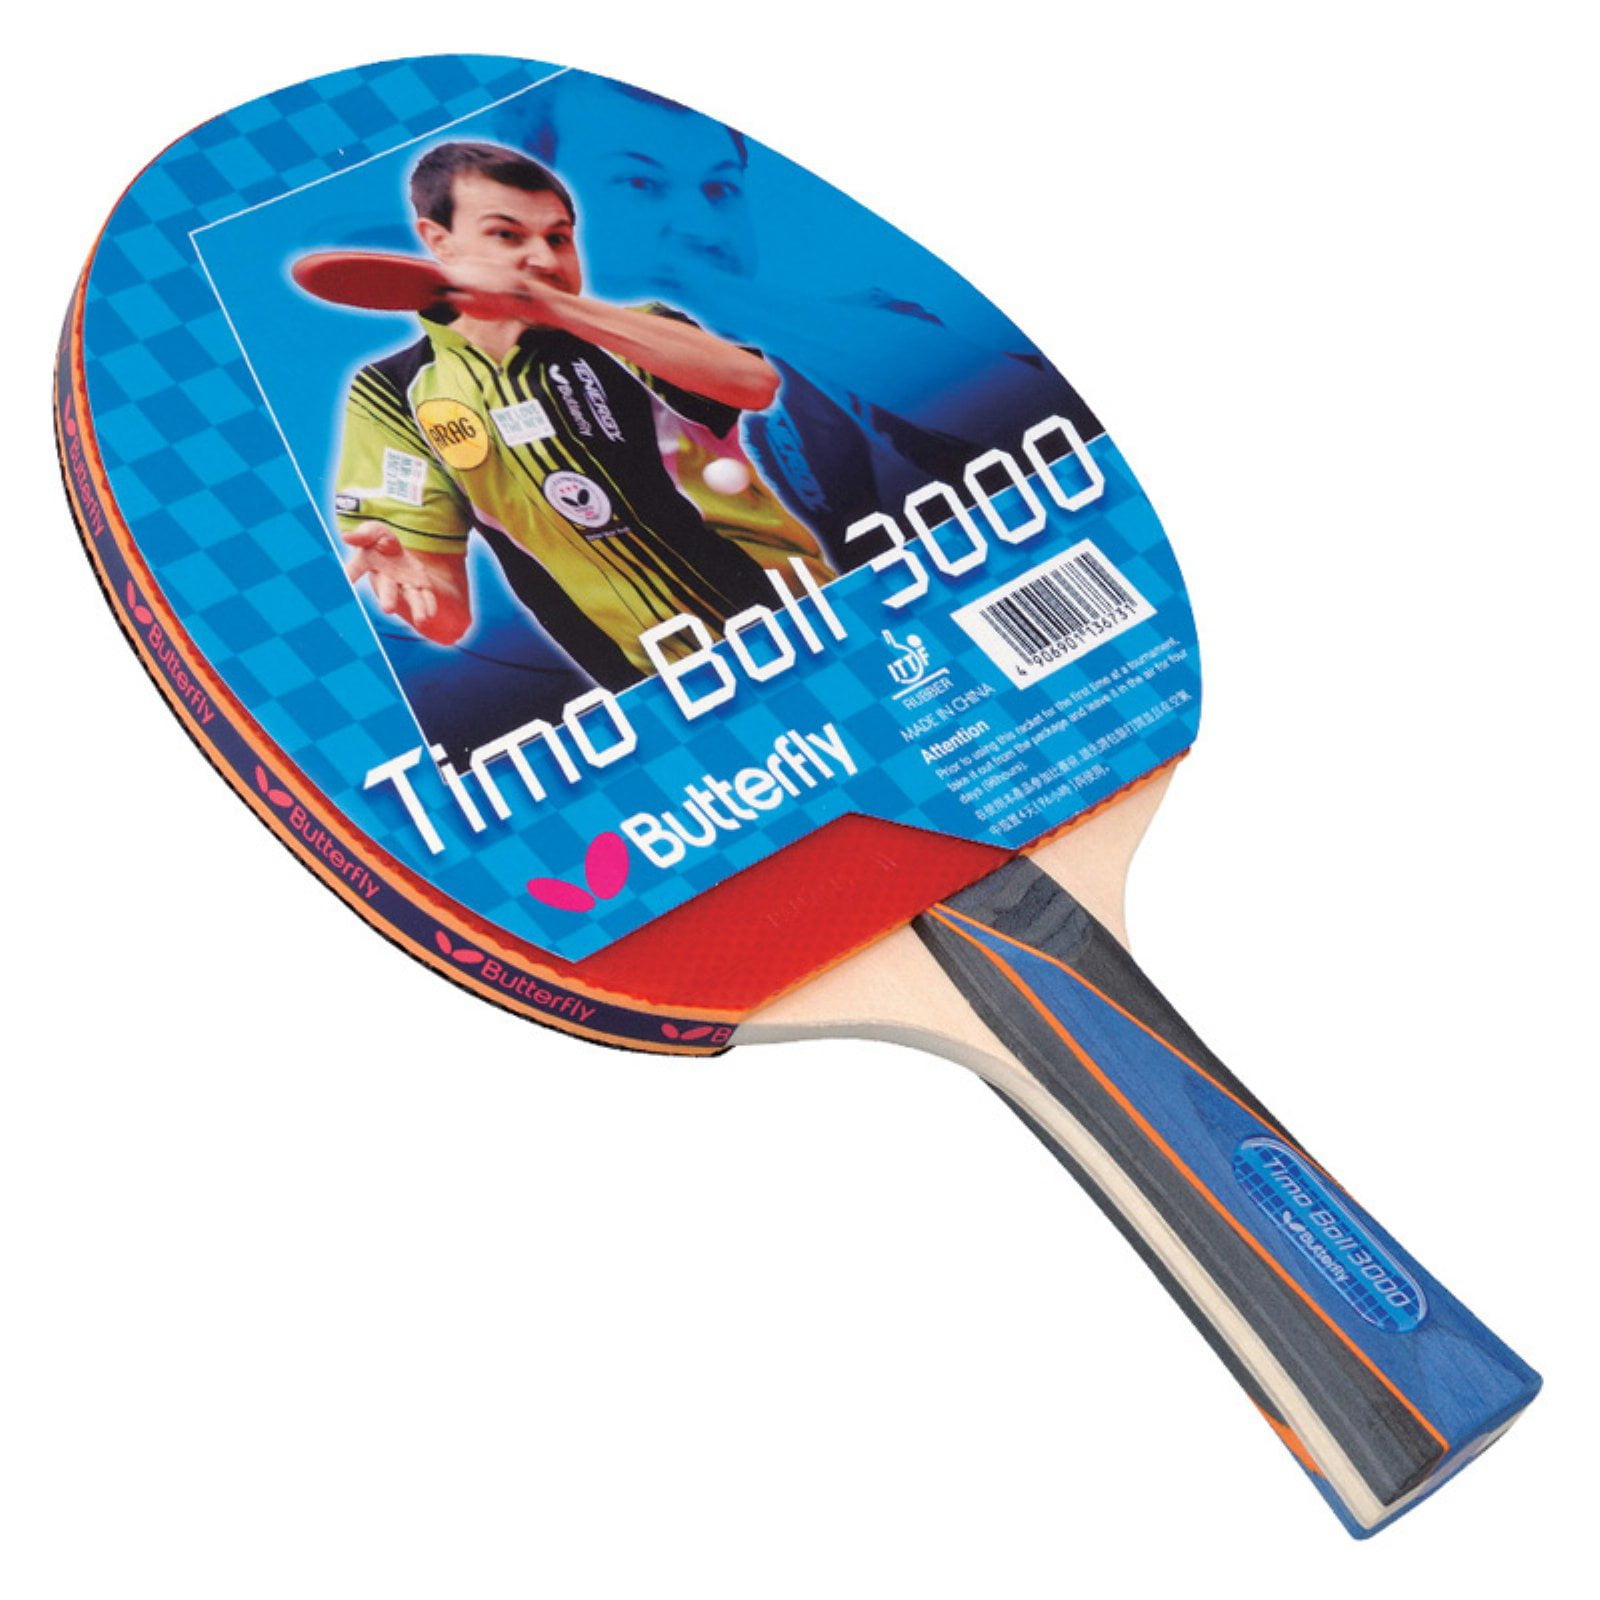 Butterfly Timo Boll Shakehand Ping Pong Paddle - Good Speed And Spin With Superb Control - Japan Series - Recommended For Level Players - International Table Tennis Federation Approved -